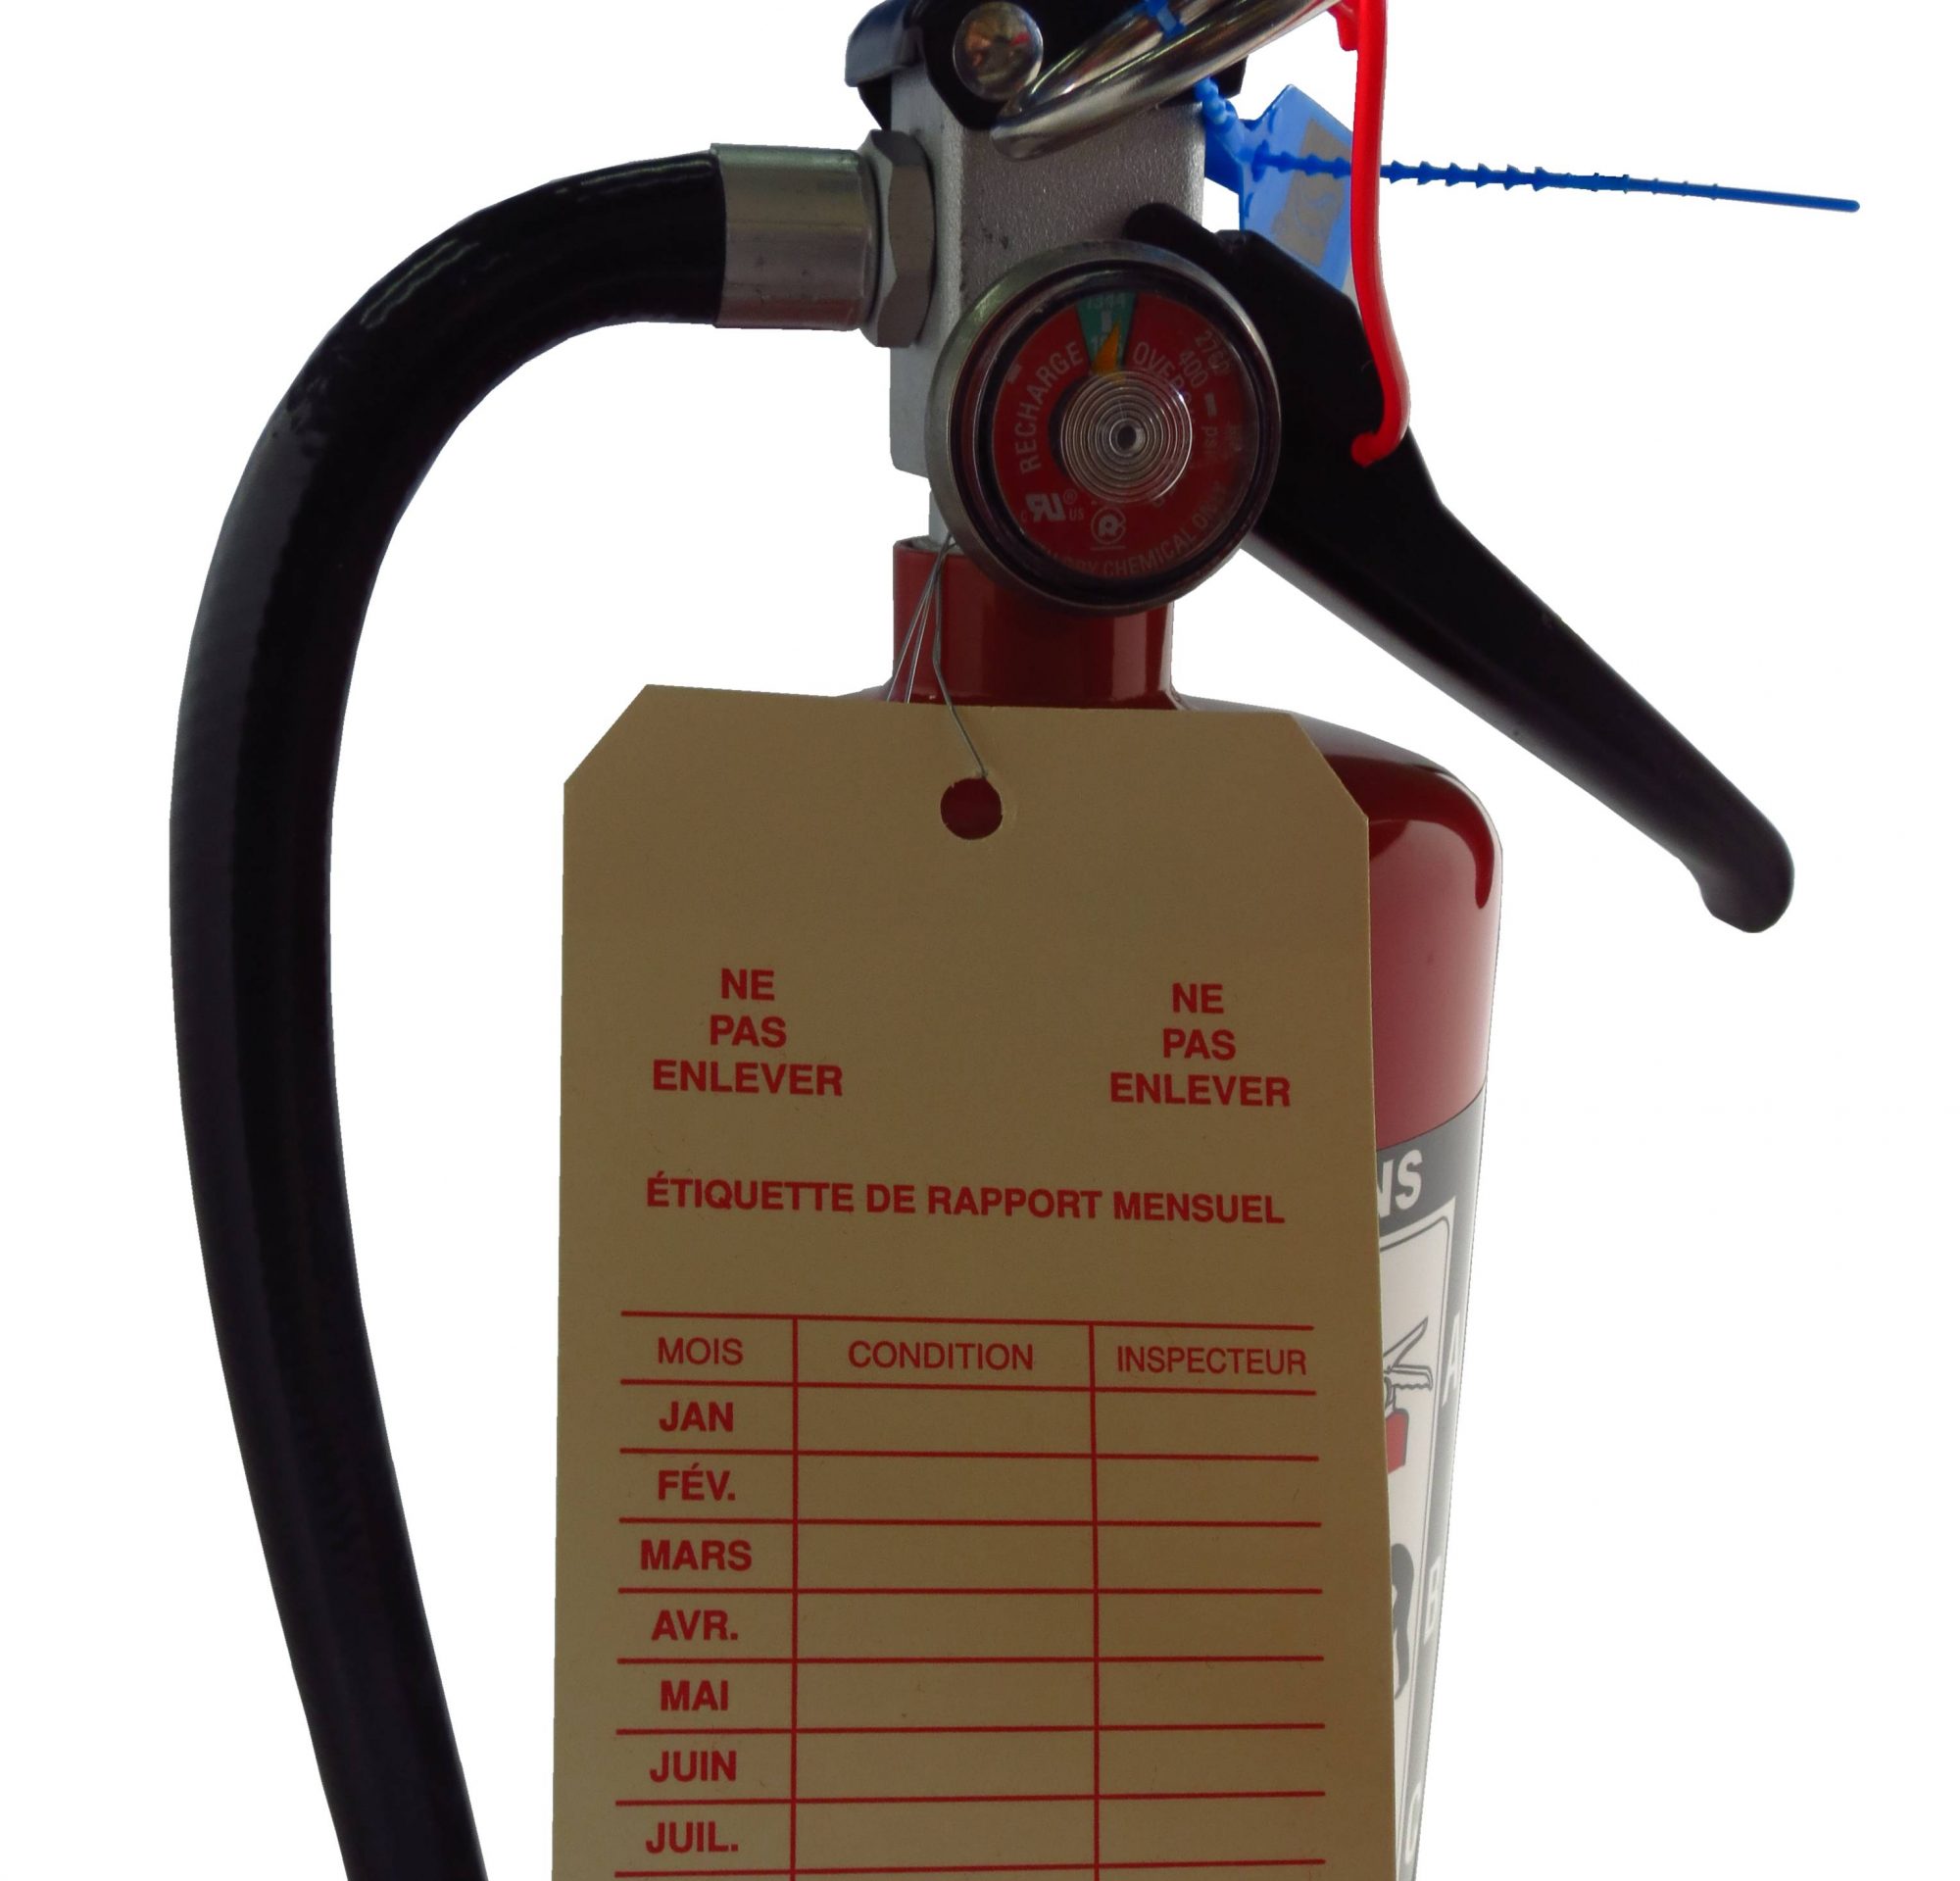 Steps for performing an inspection on portable fire extinguishers.